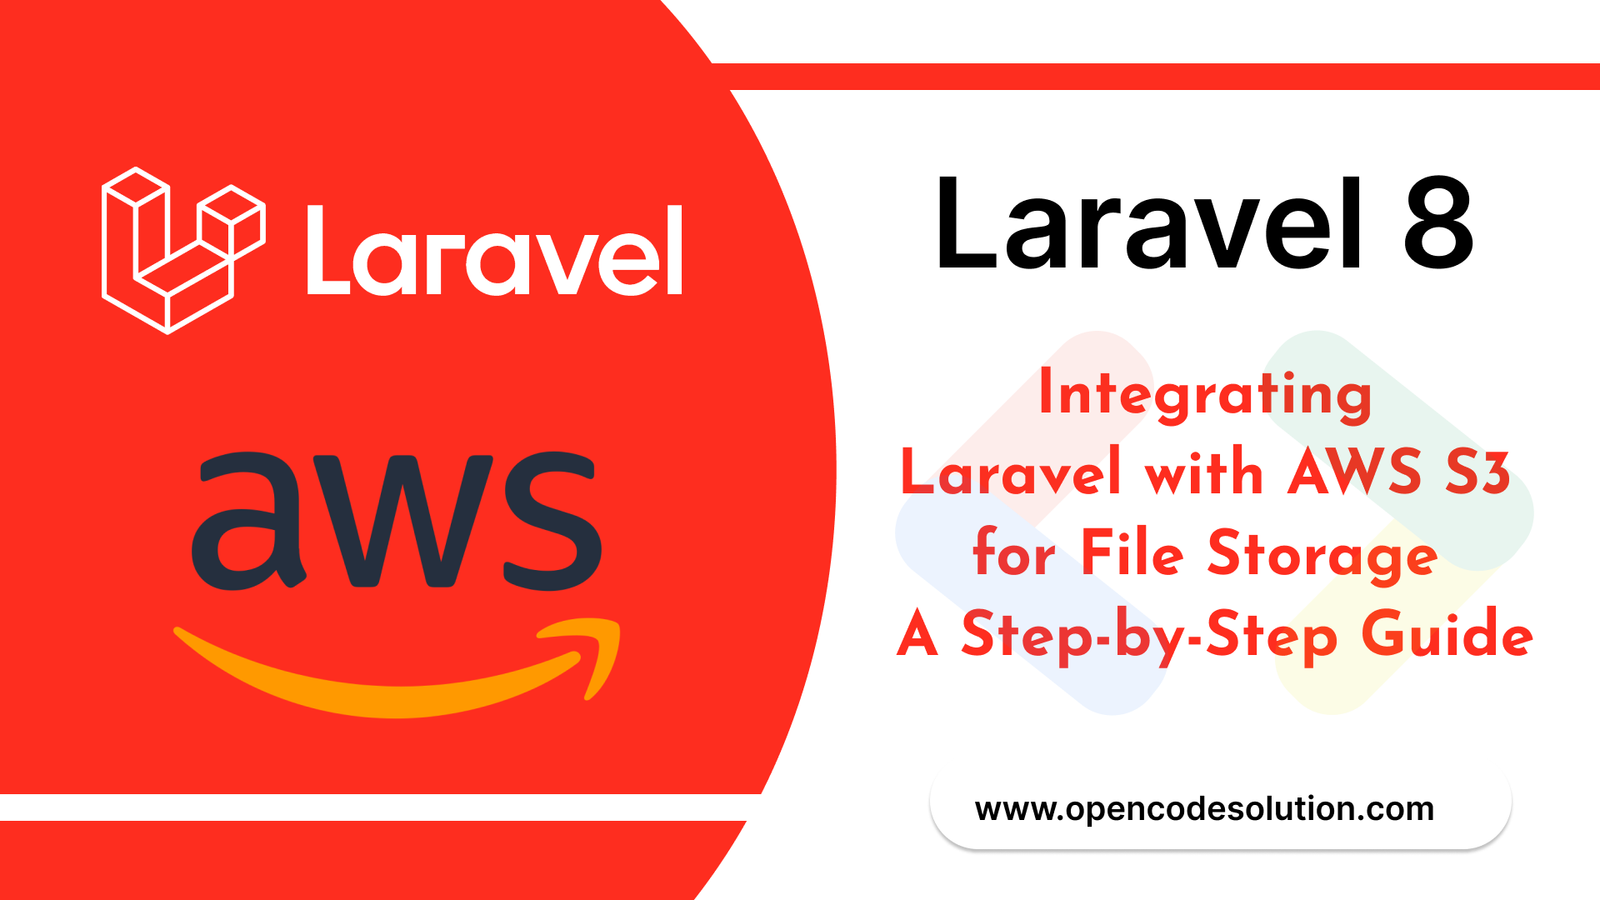 Integrating Laravel with AWS S3 for File Storage: A Step-by-Step Guide